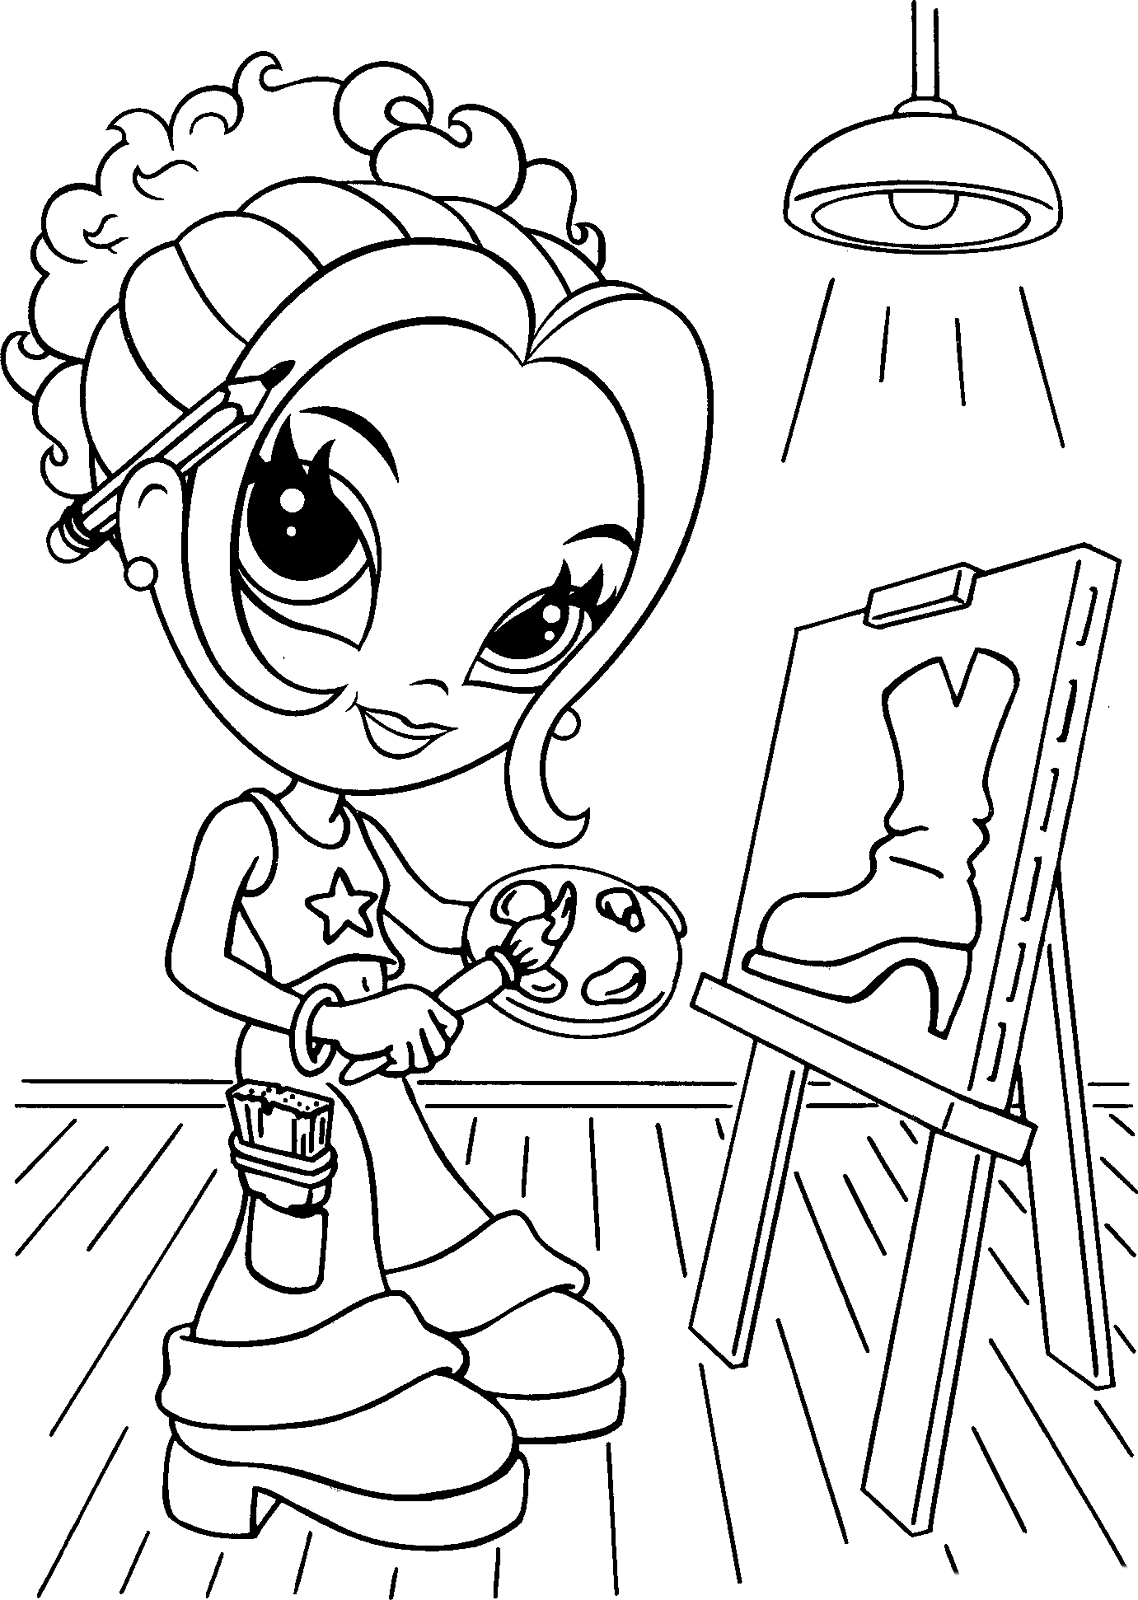 Coloring page - The girl draws